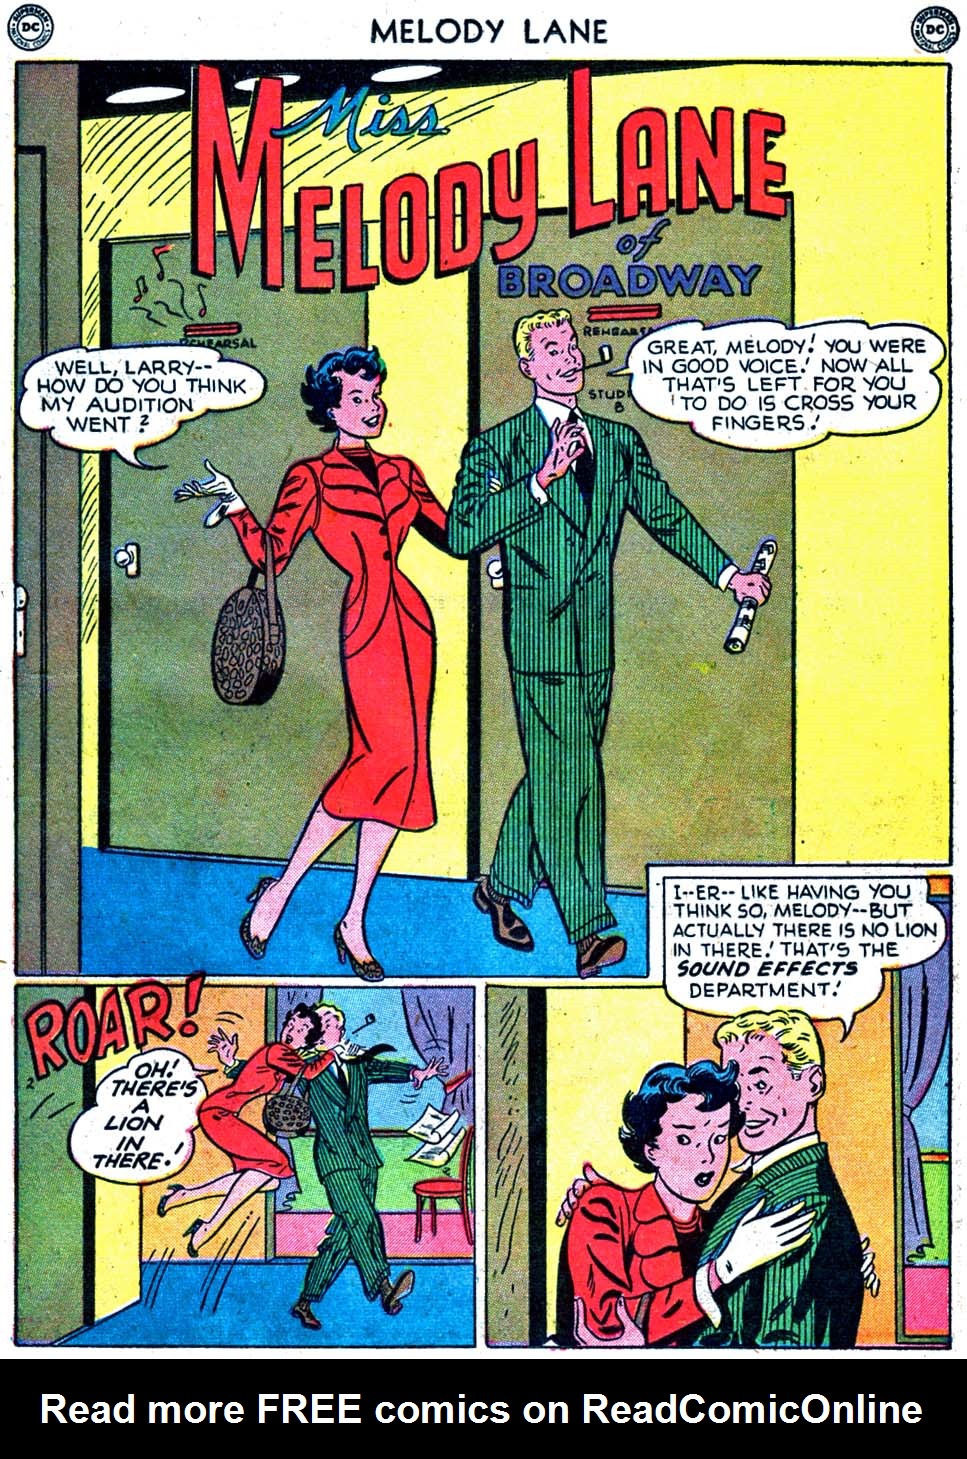 Read online Miss Melody Lane of Broadway comic -  Issue #2 - 15